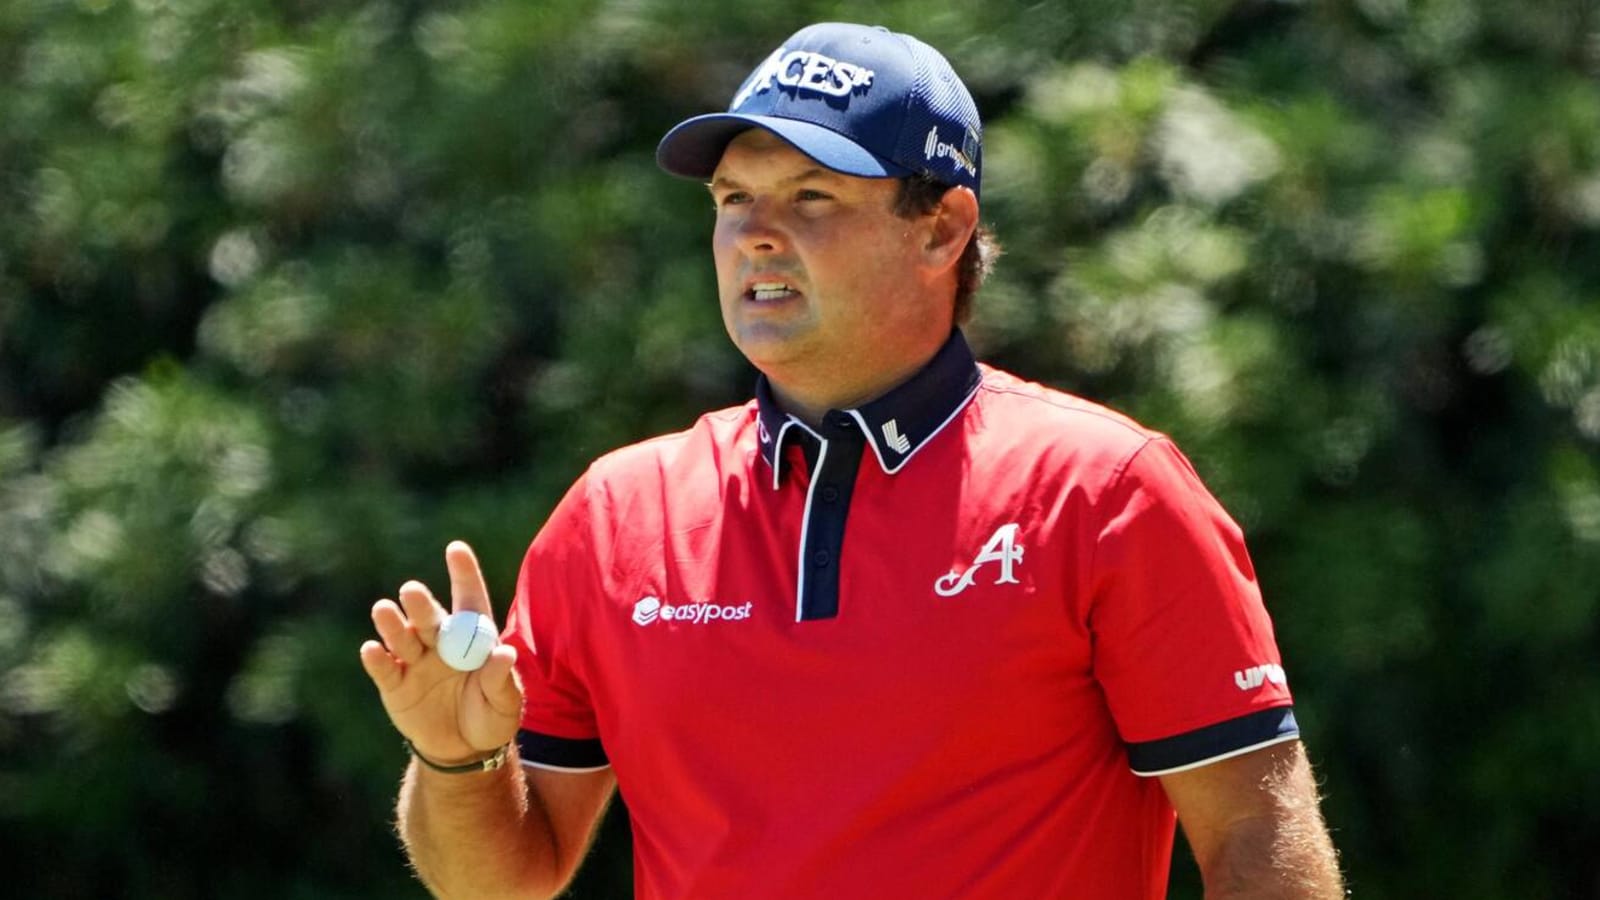 Watch: Patrick Reed makes incredible eagle on the fly during PGA Championship's third round